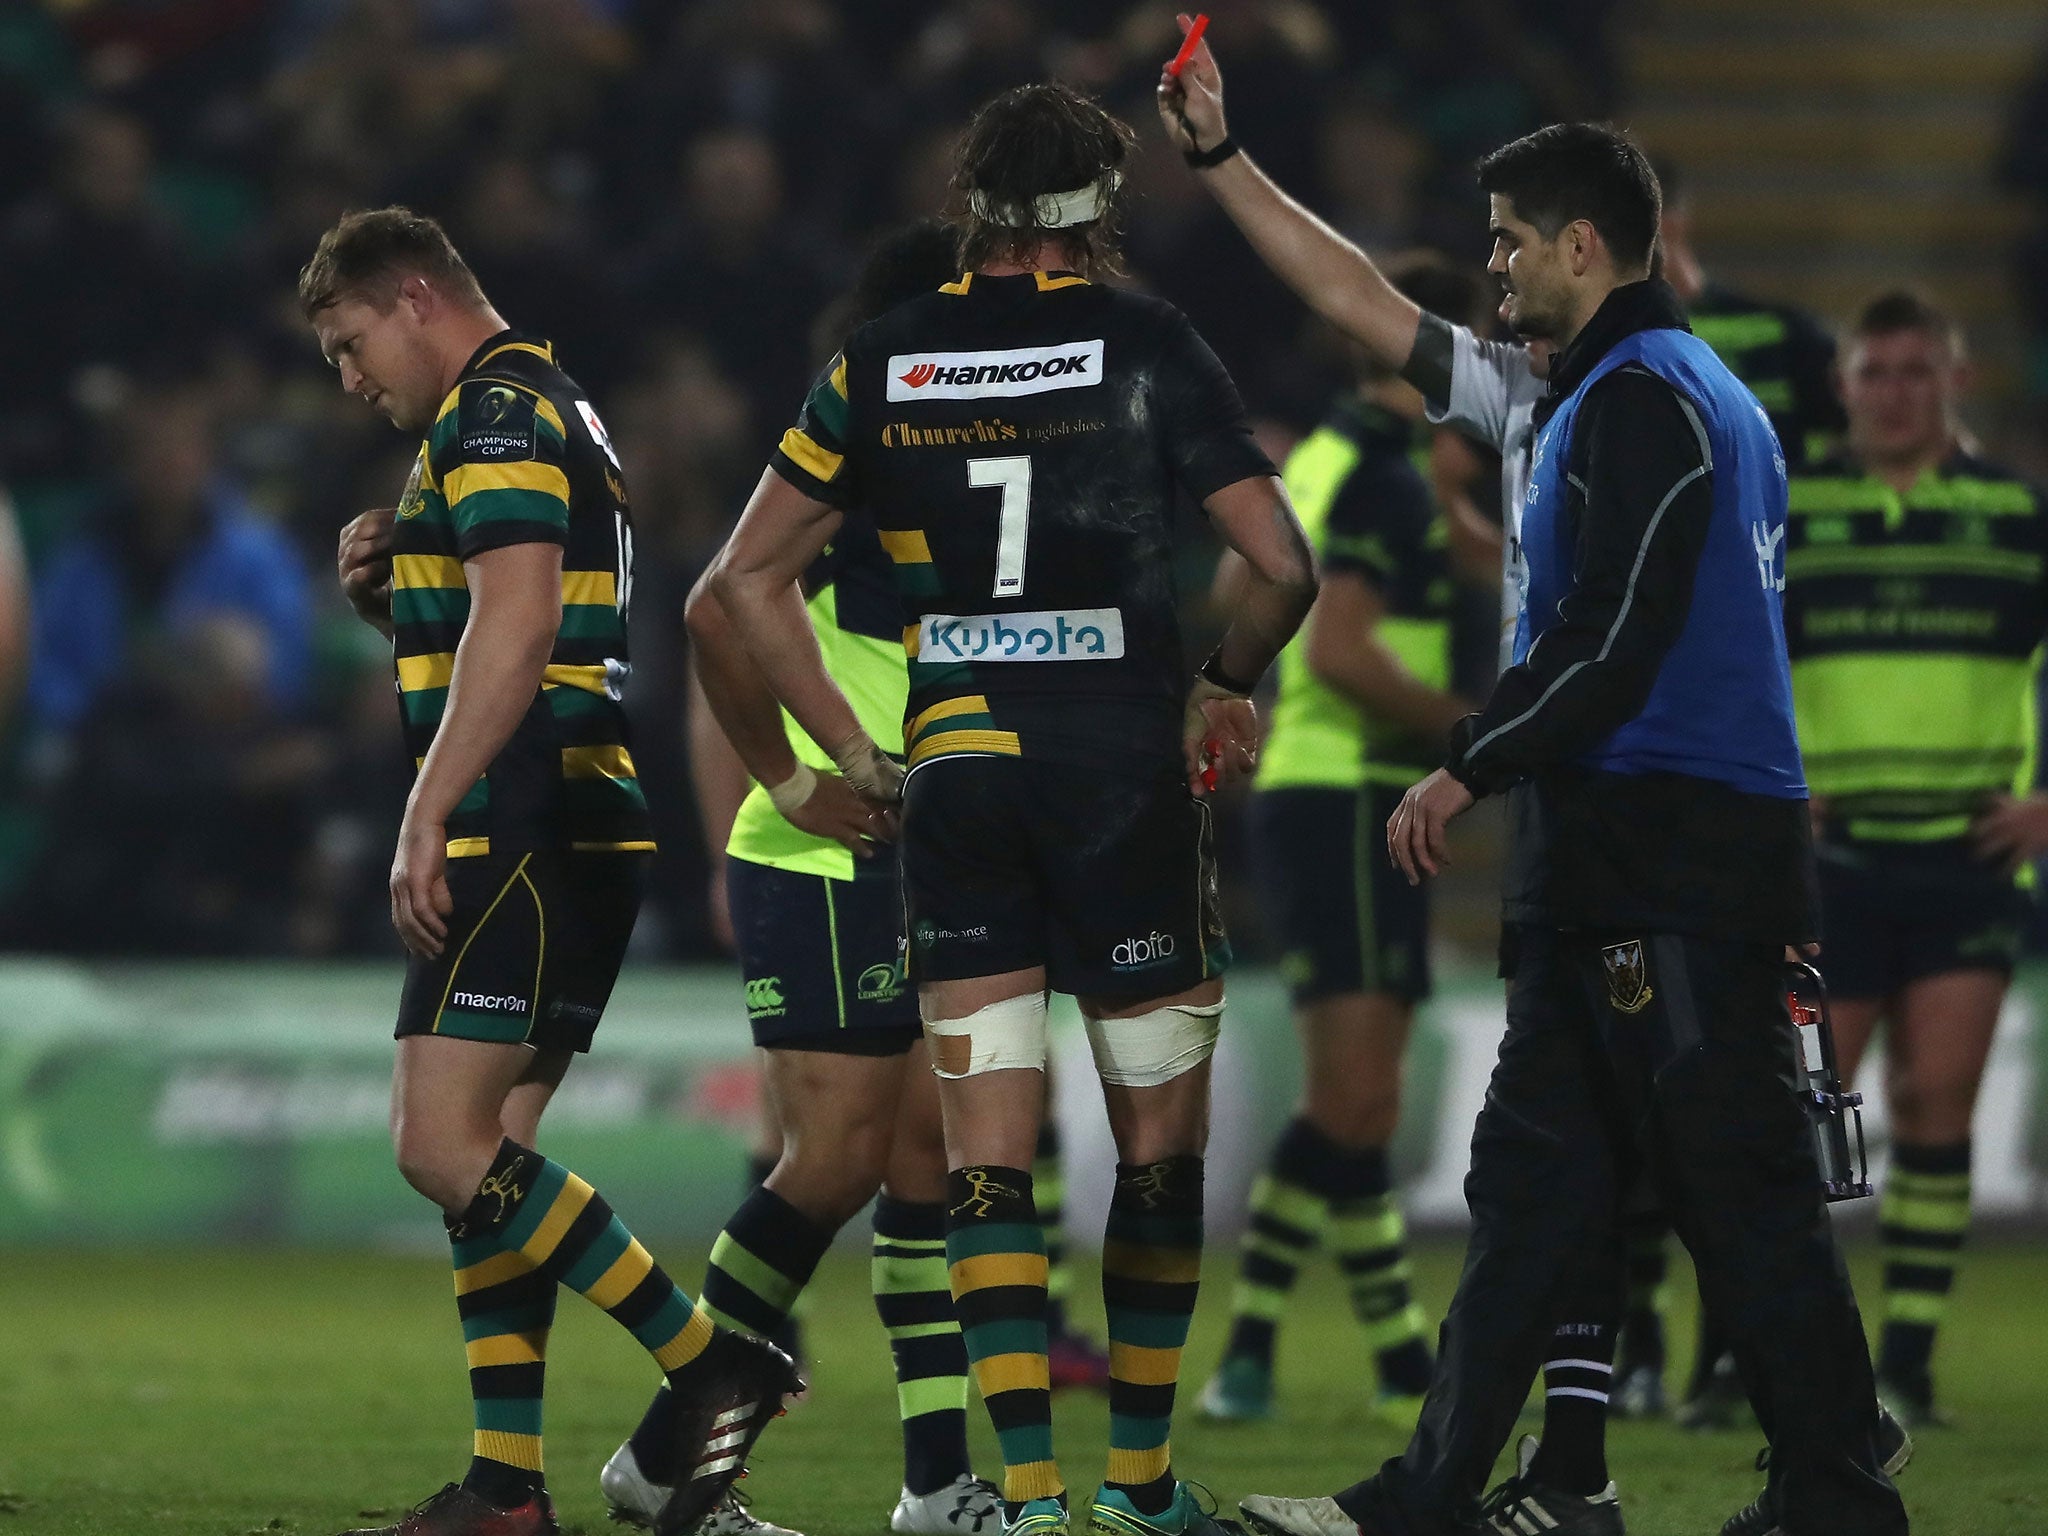 Dylan Hartley was sent-off in Northampton's defeat by Leinster and has been banned for six weeks